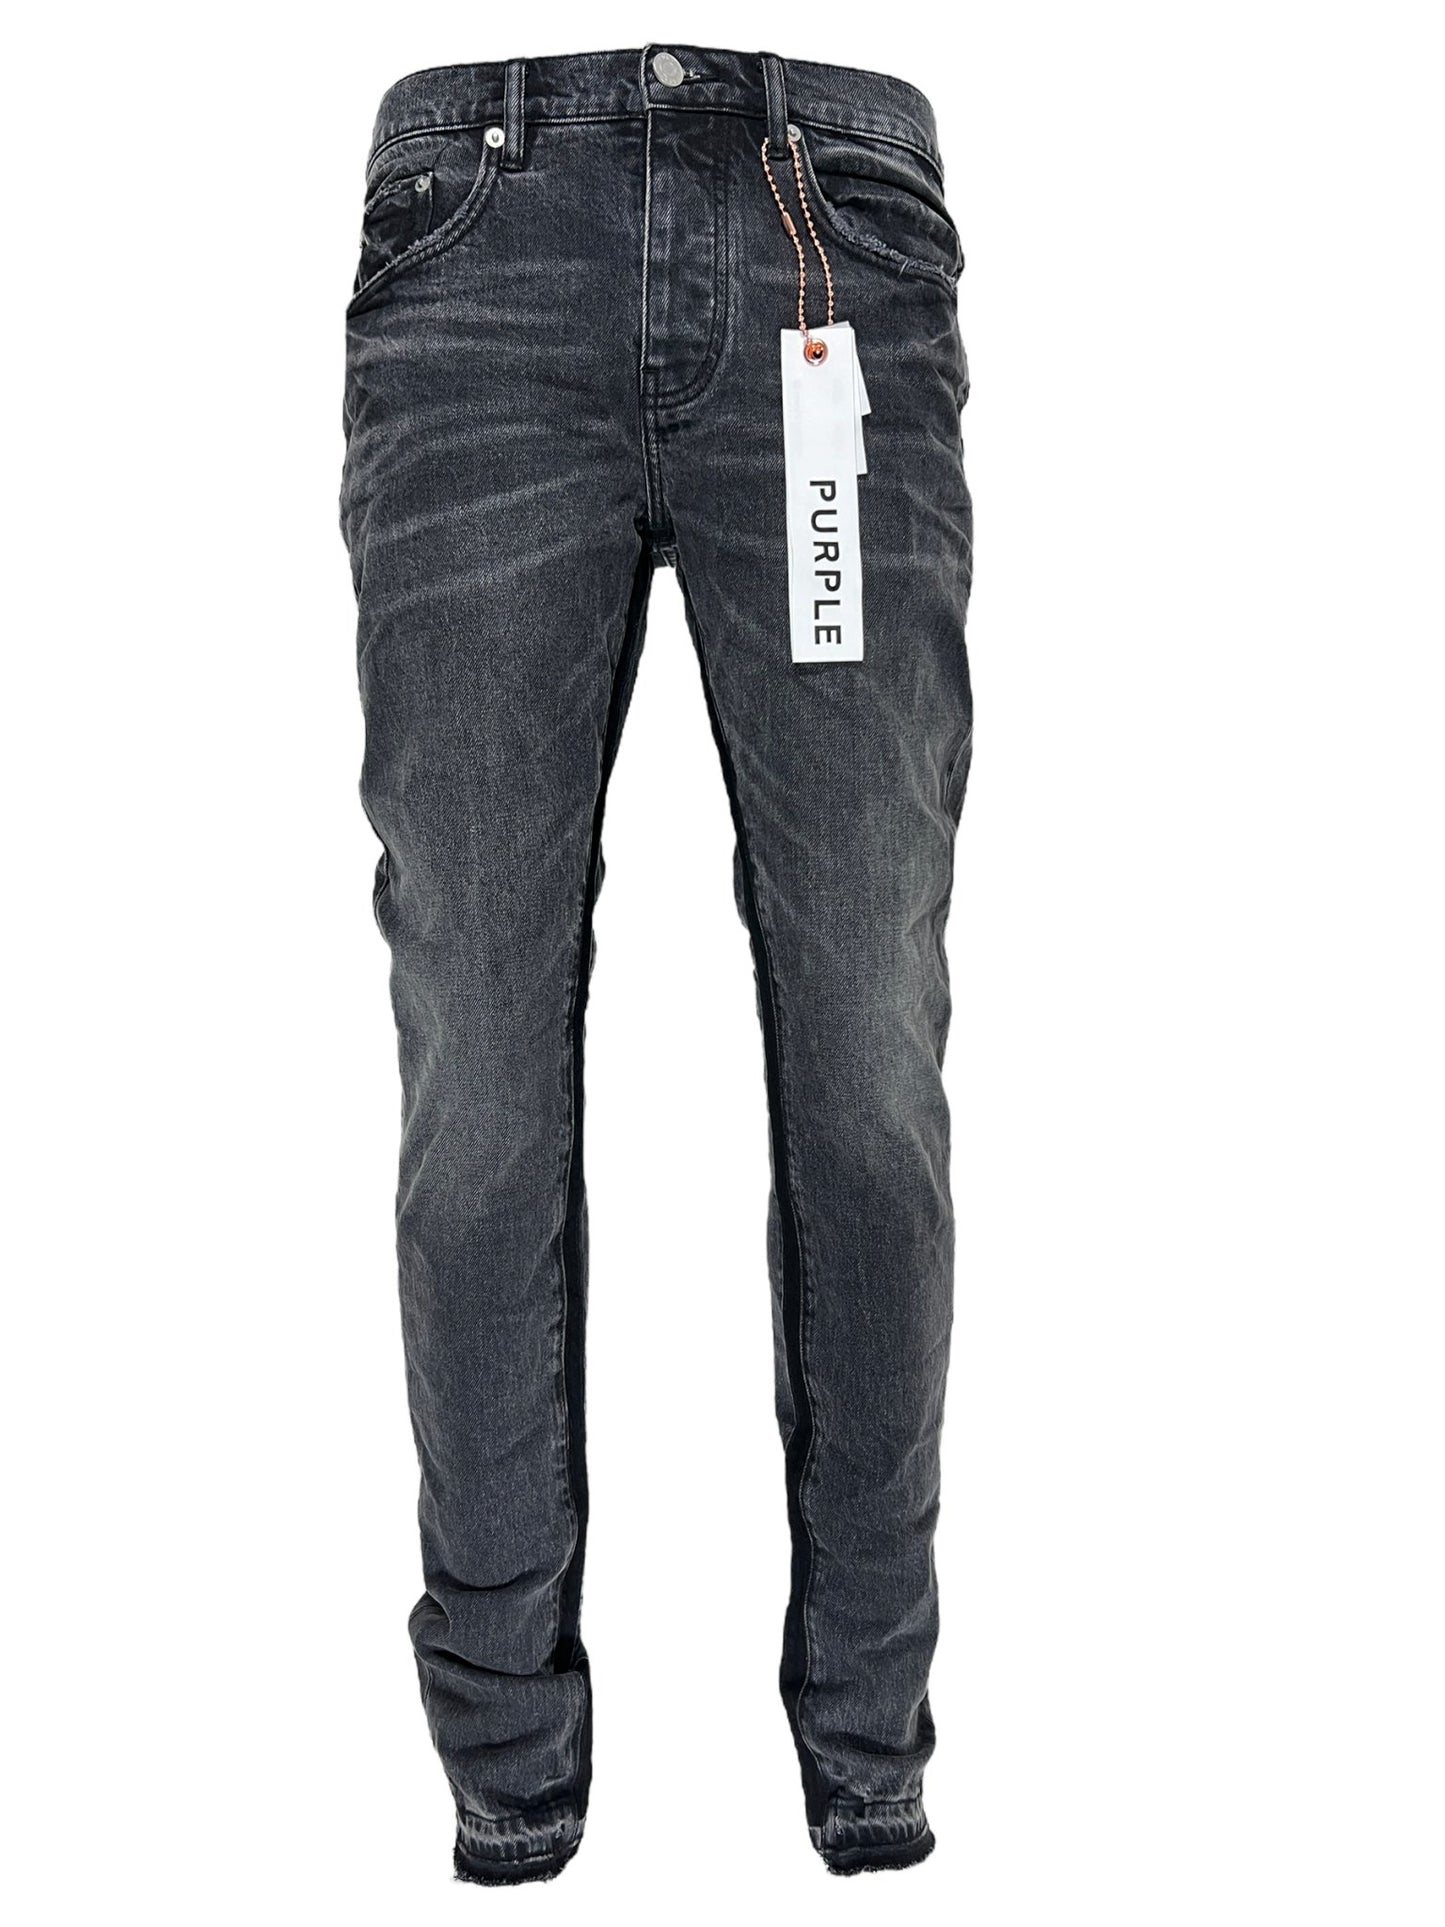 A pair of PURPLE BRAND men's low rise skinny jeans with a tag on them.